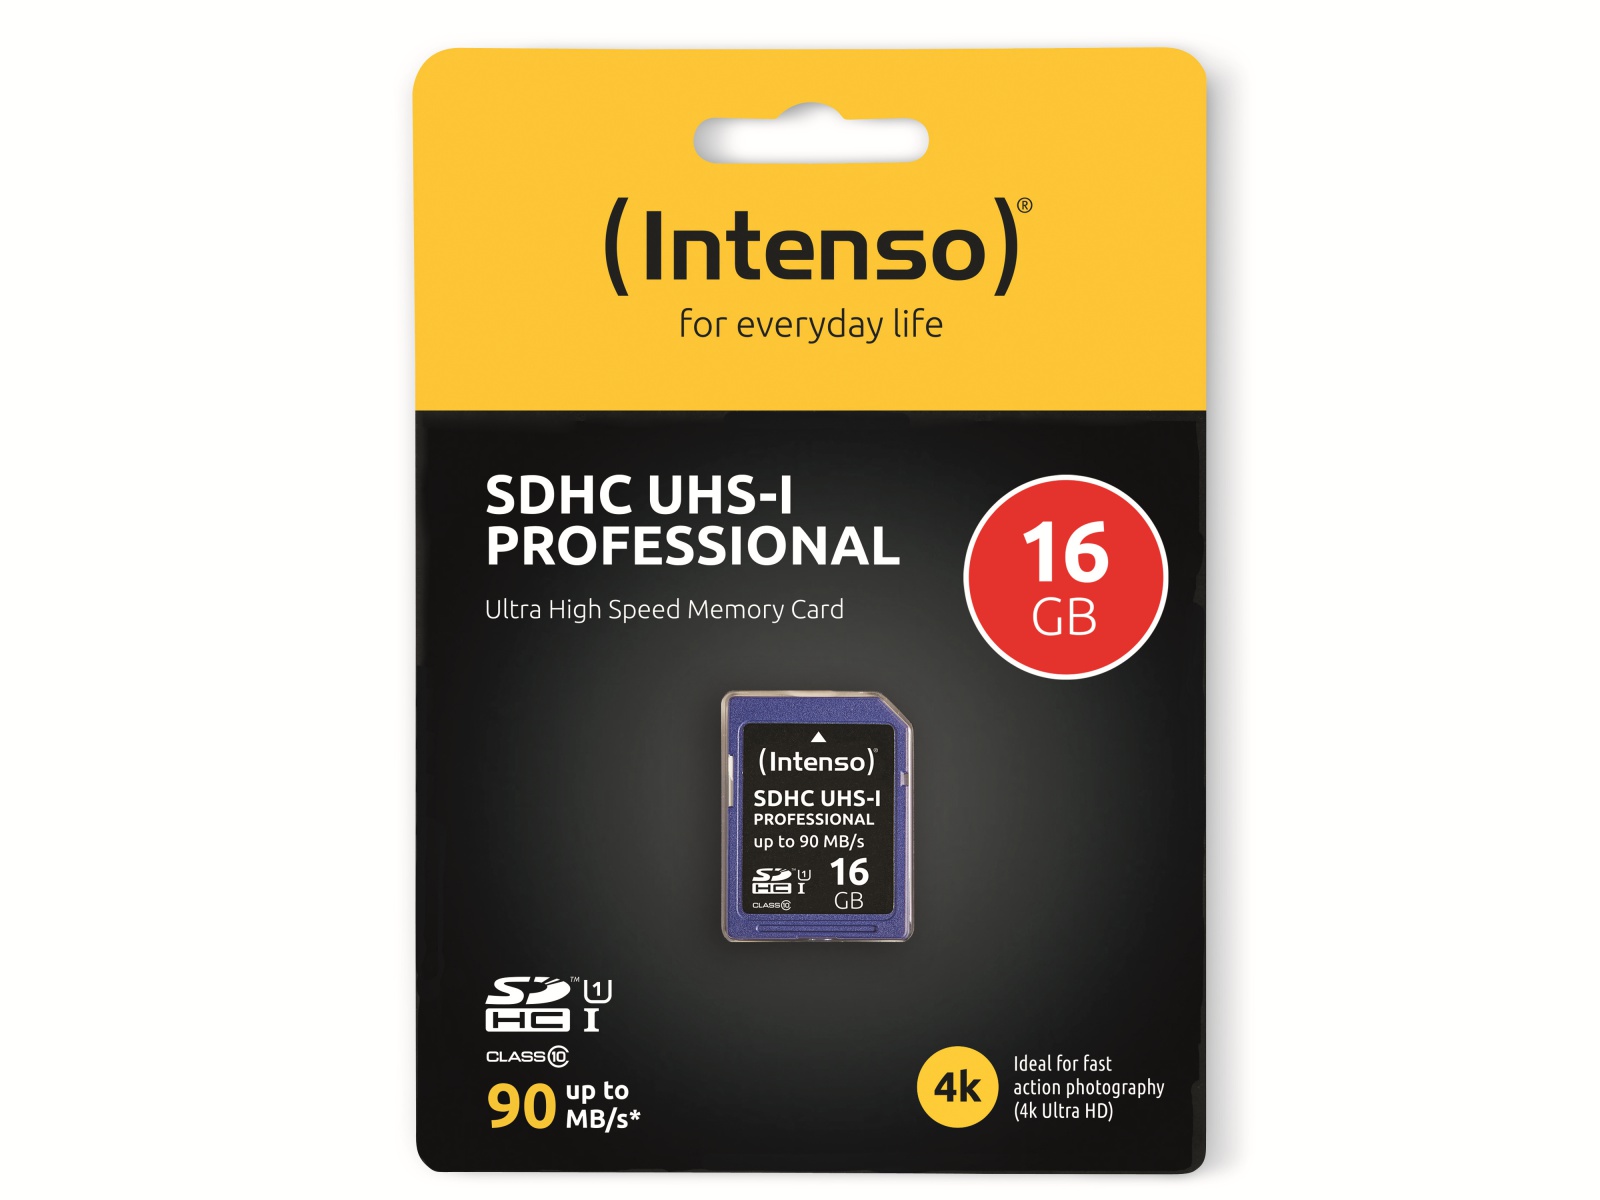 INTENSO SDHC Card 3431470, 16 GB, Class 10, UHS-I